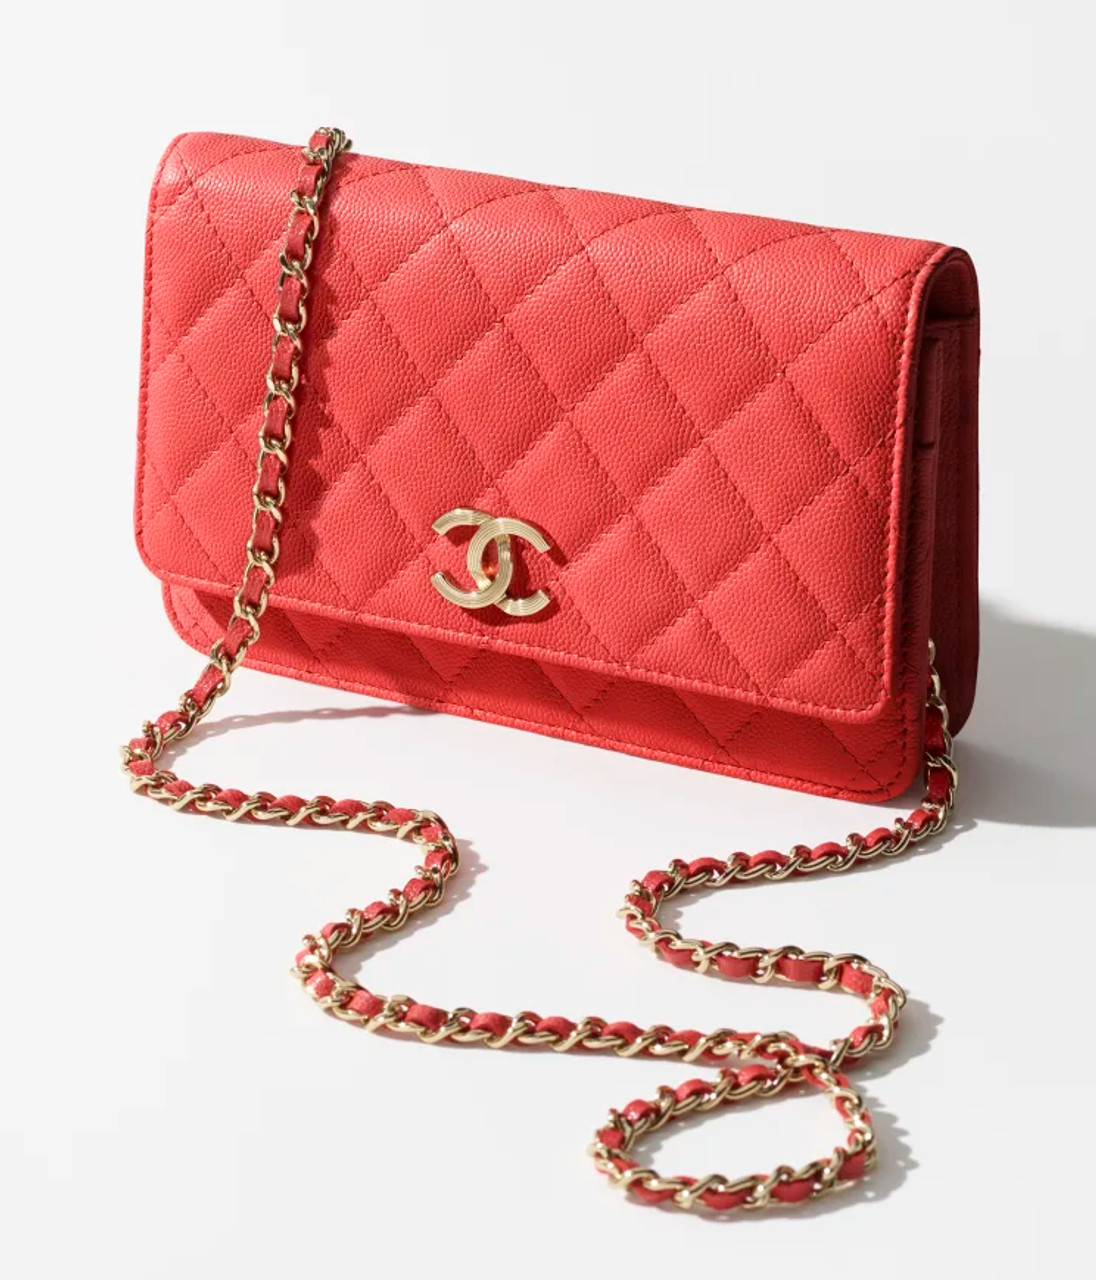 Chanel Coin Purse Wallets for Women